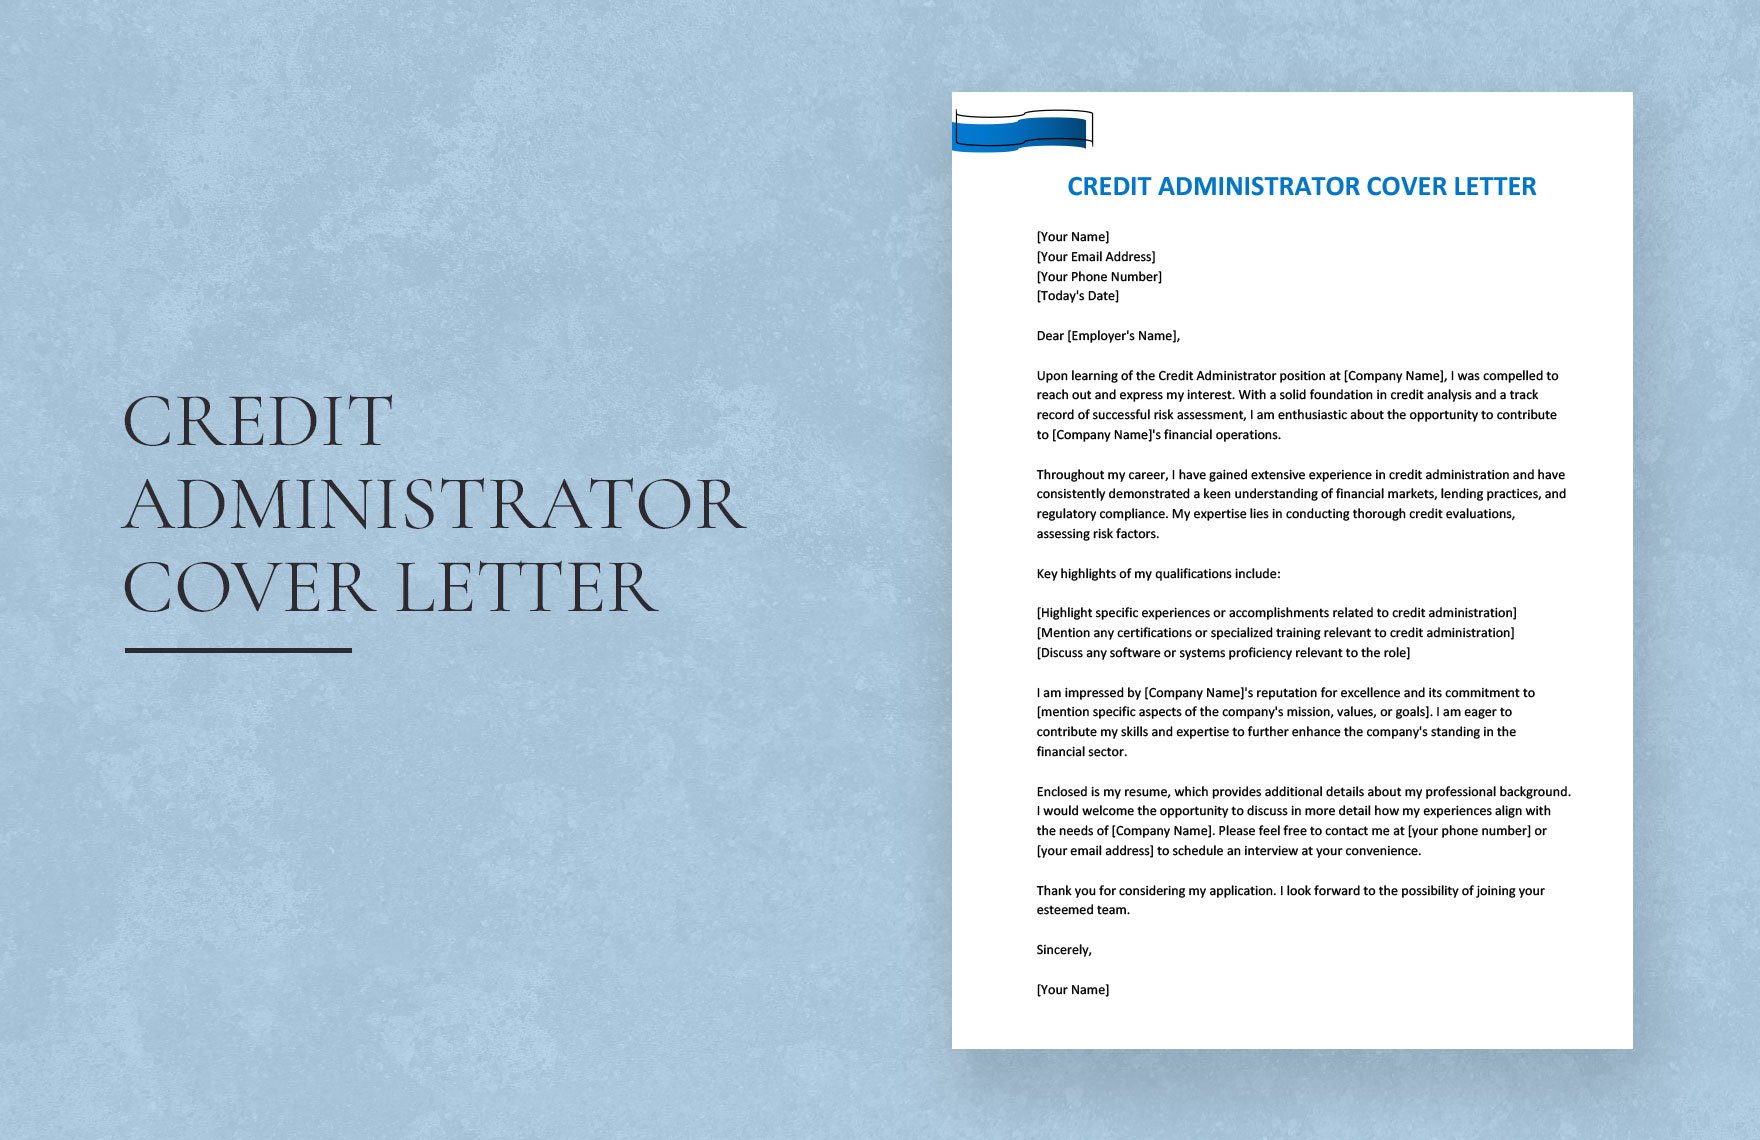 Credit Administrator Cover Letter